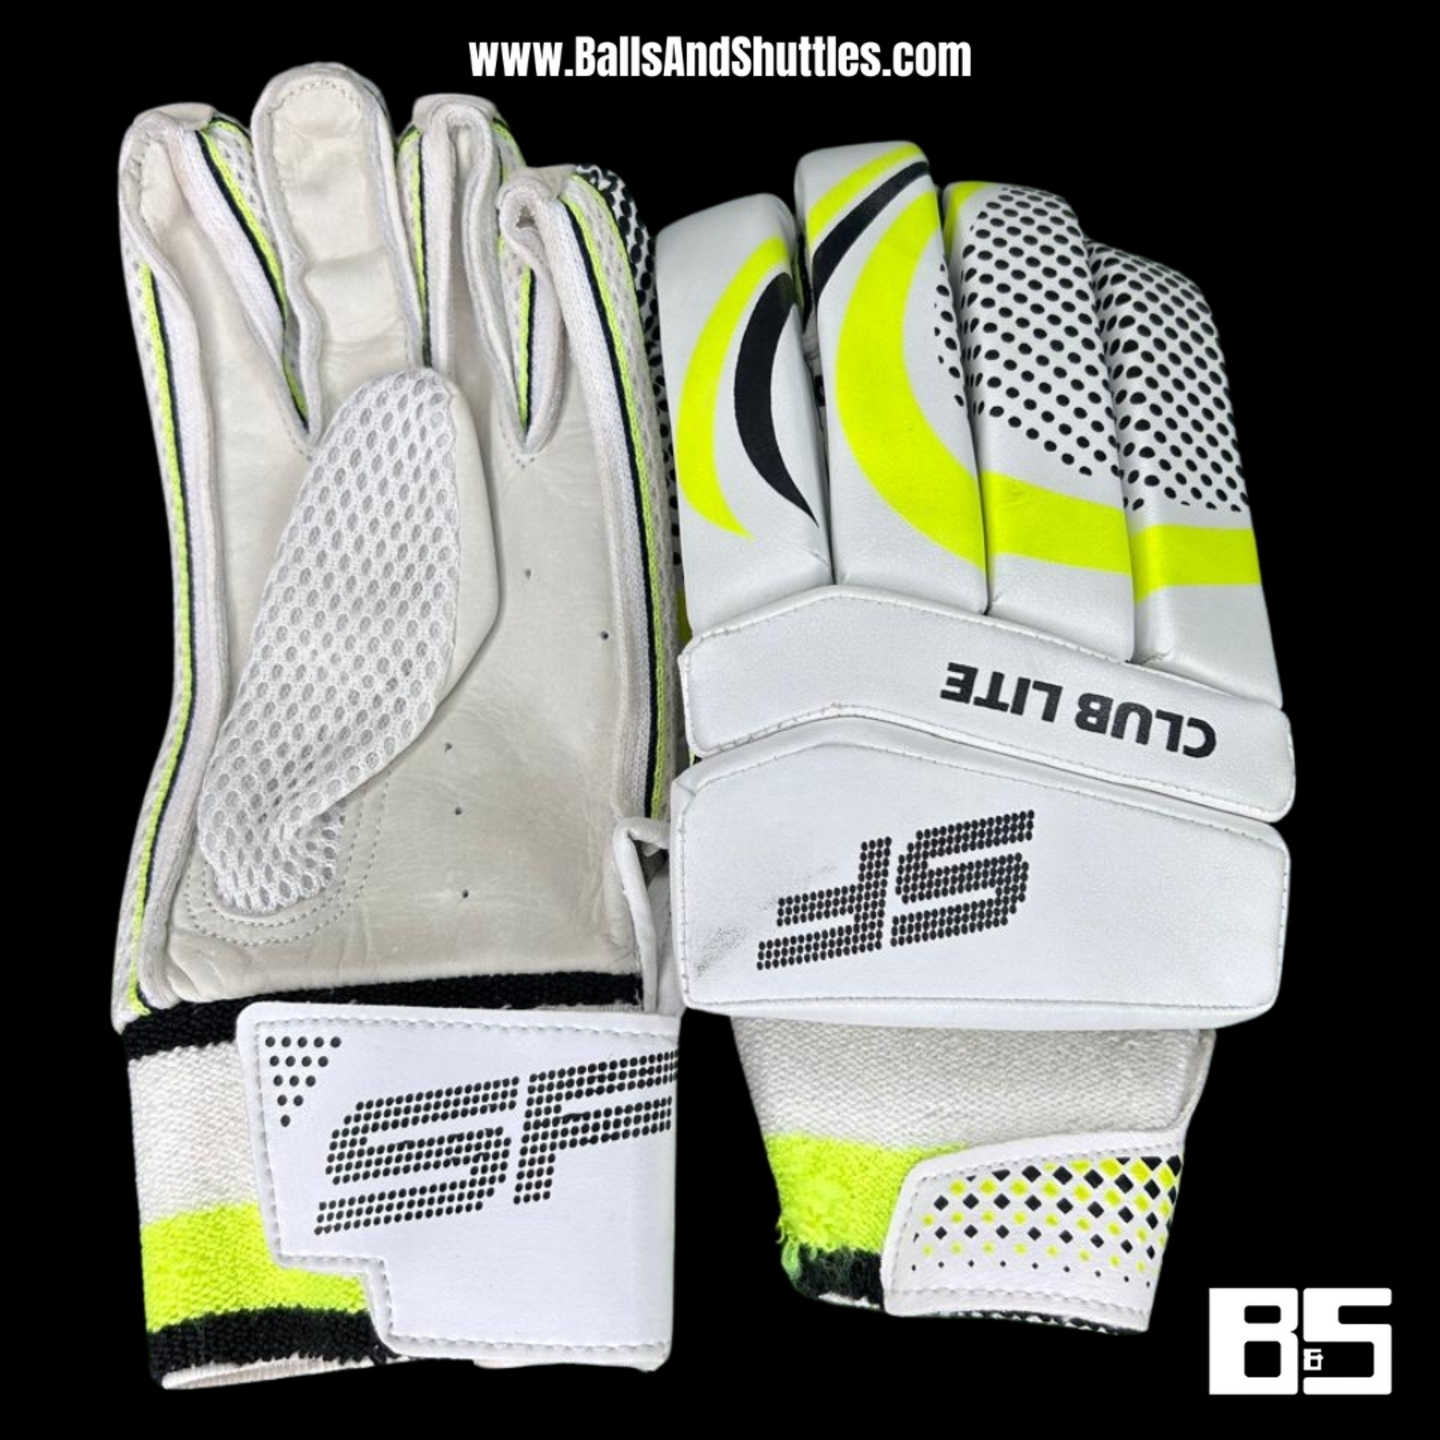 SF CLUBLITE CRICKET BATTING GLOVES  YOUTH SIZE BATTING GLOVES  RH BATTING GLOVES